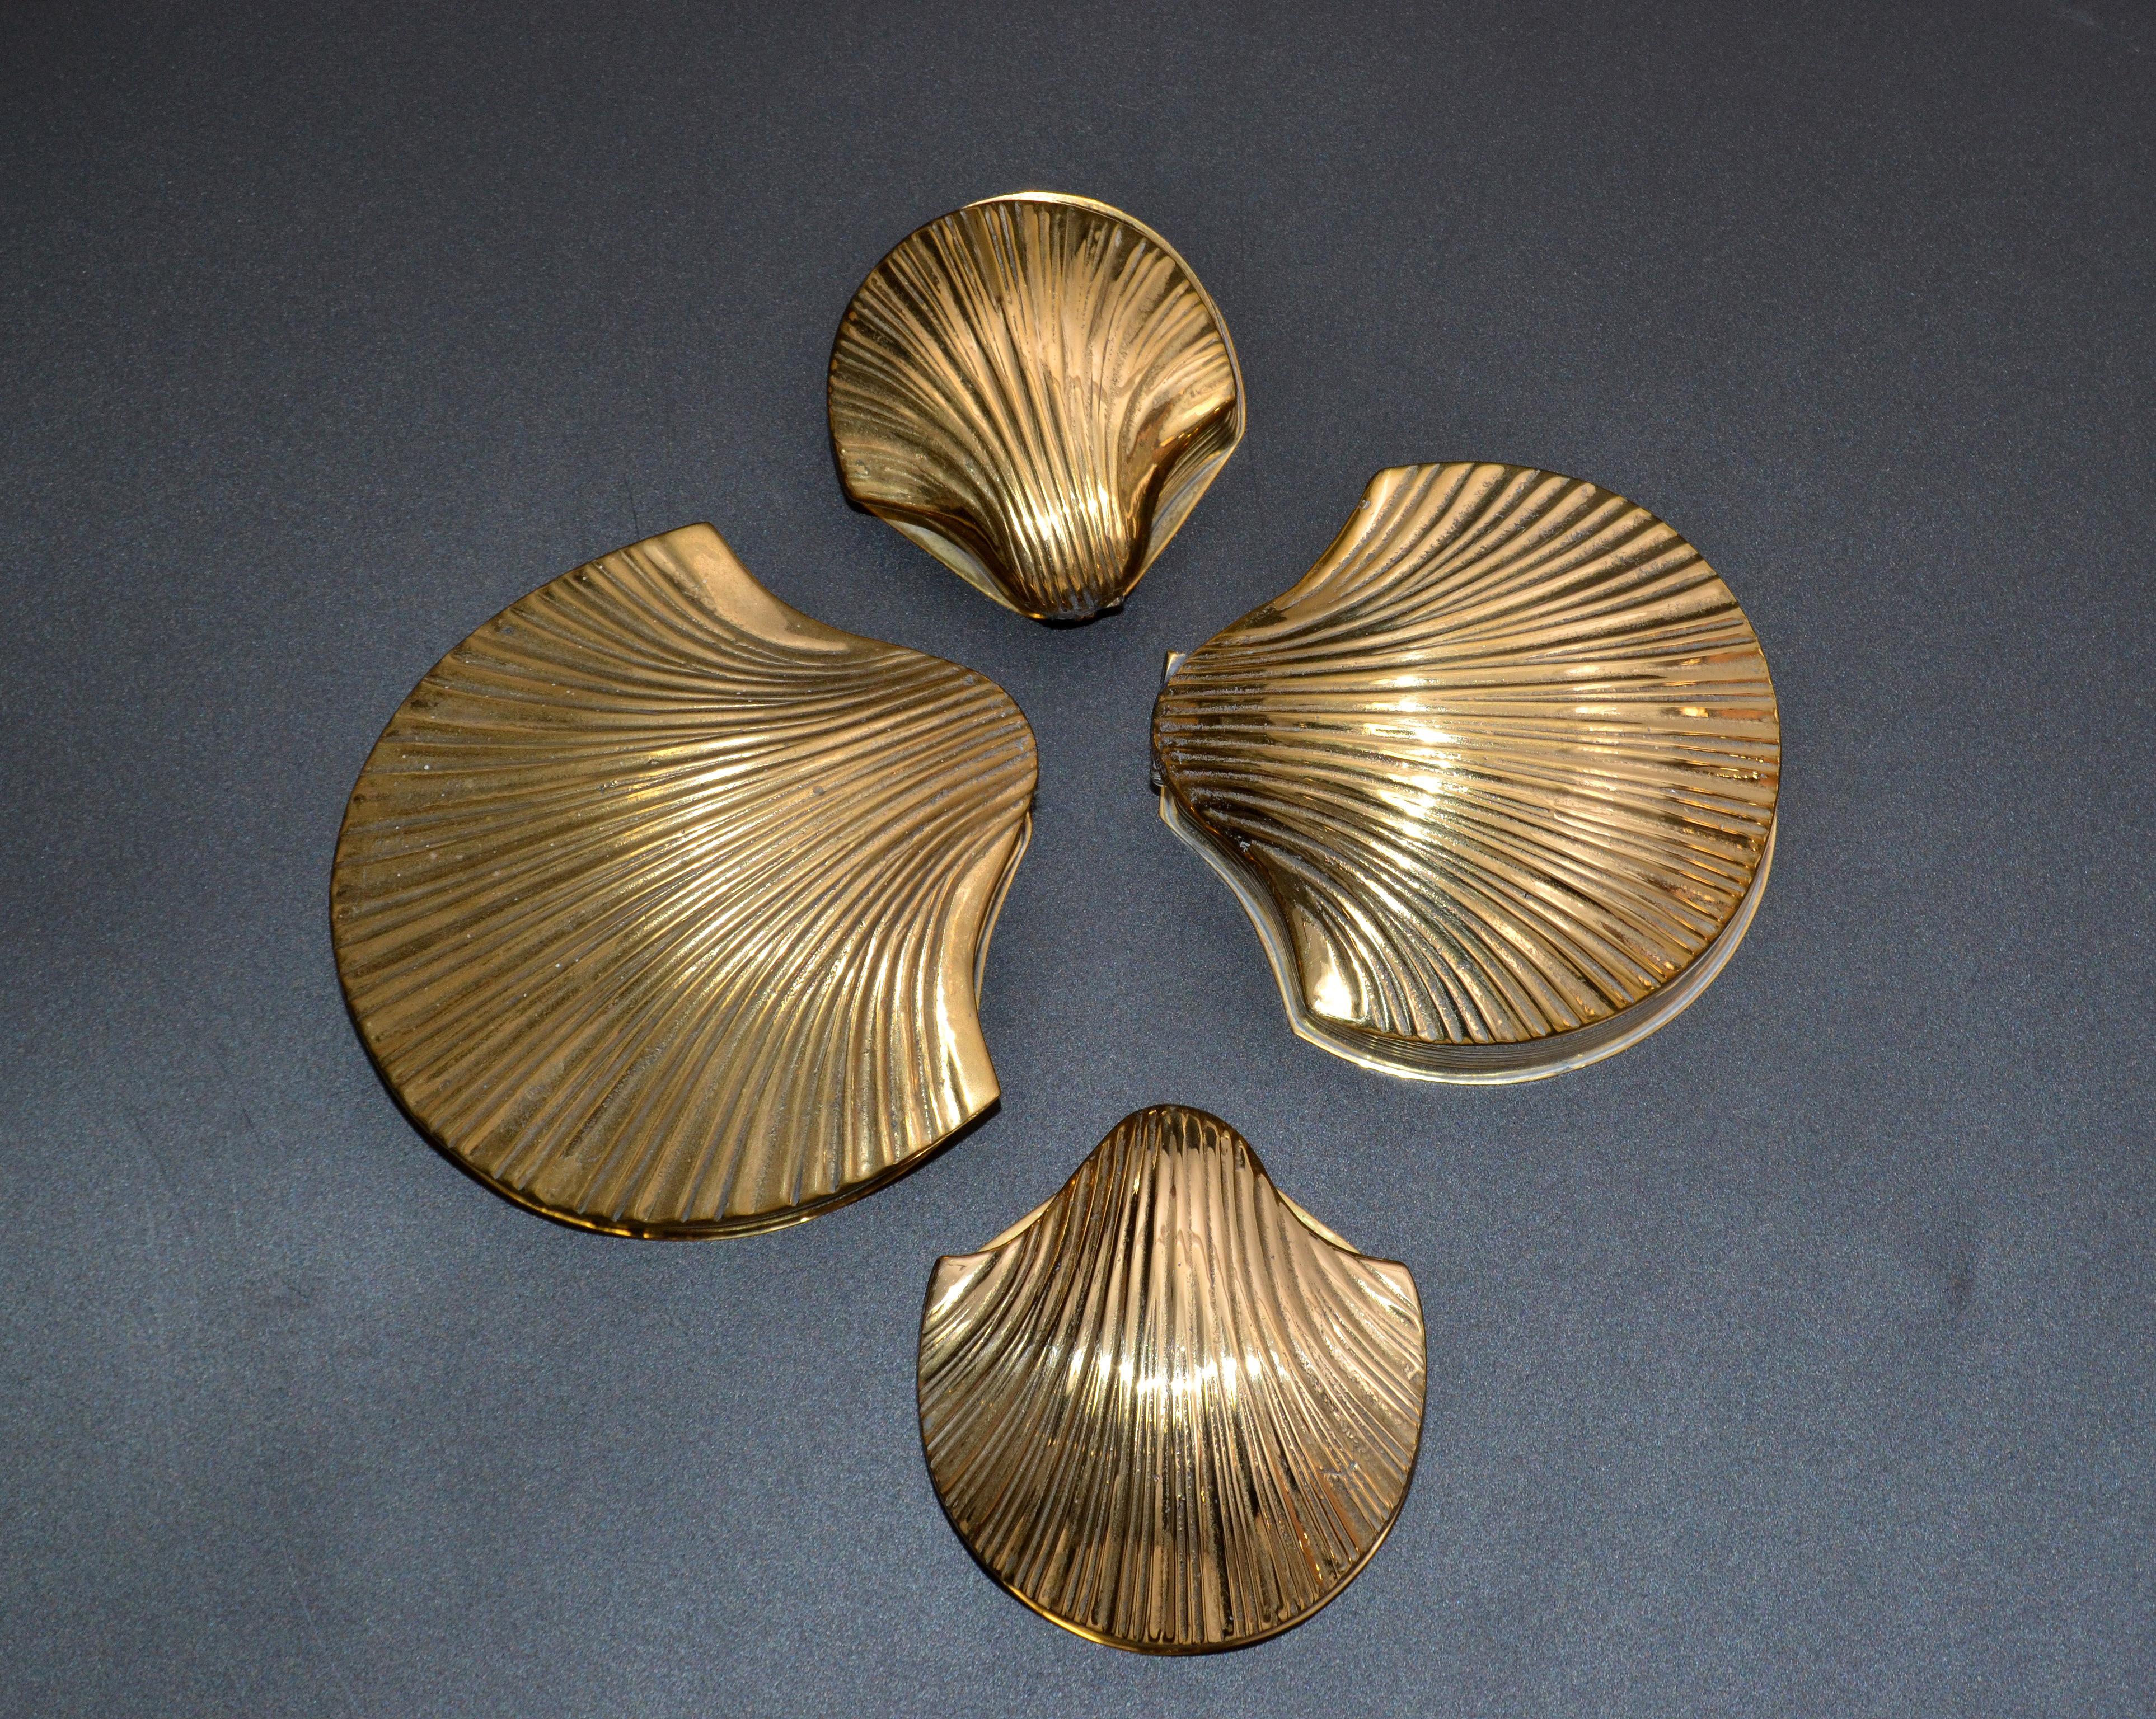 4 in 1 Nesting Vintage Brass Shell Scallop Shaped Trinket Boxes, Keepsakes 1970s 3